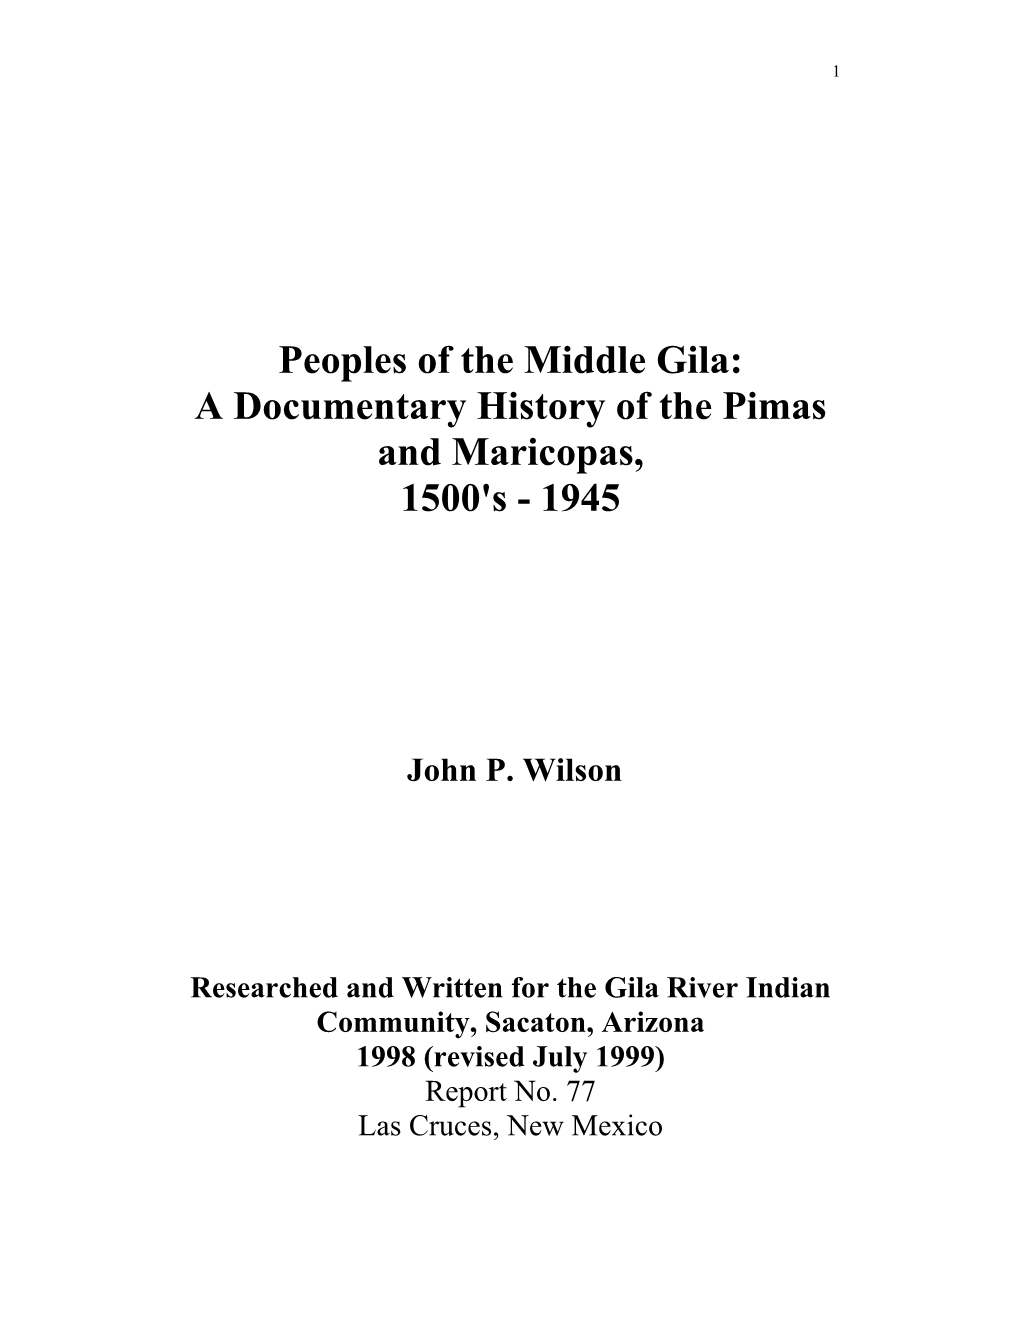 Peoples of the Middle Gila: a Documentary History of the Pimas and Maricopas, 1500'S - 1945